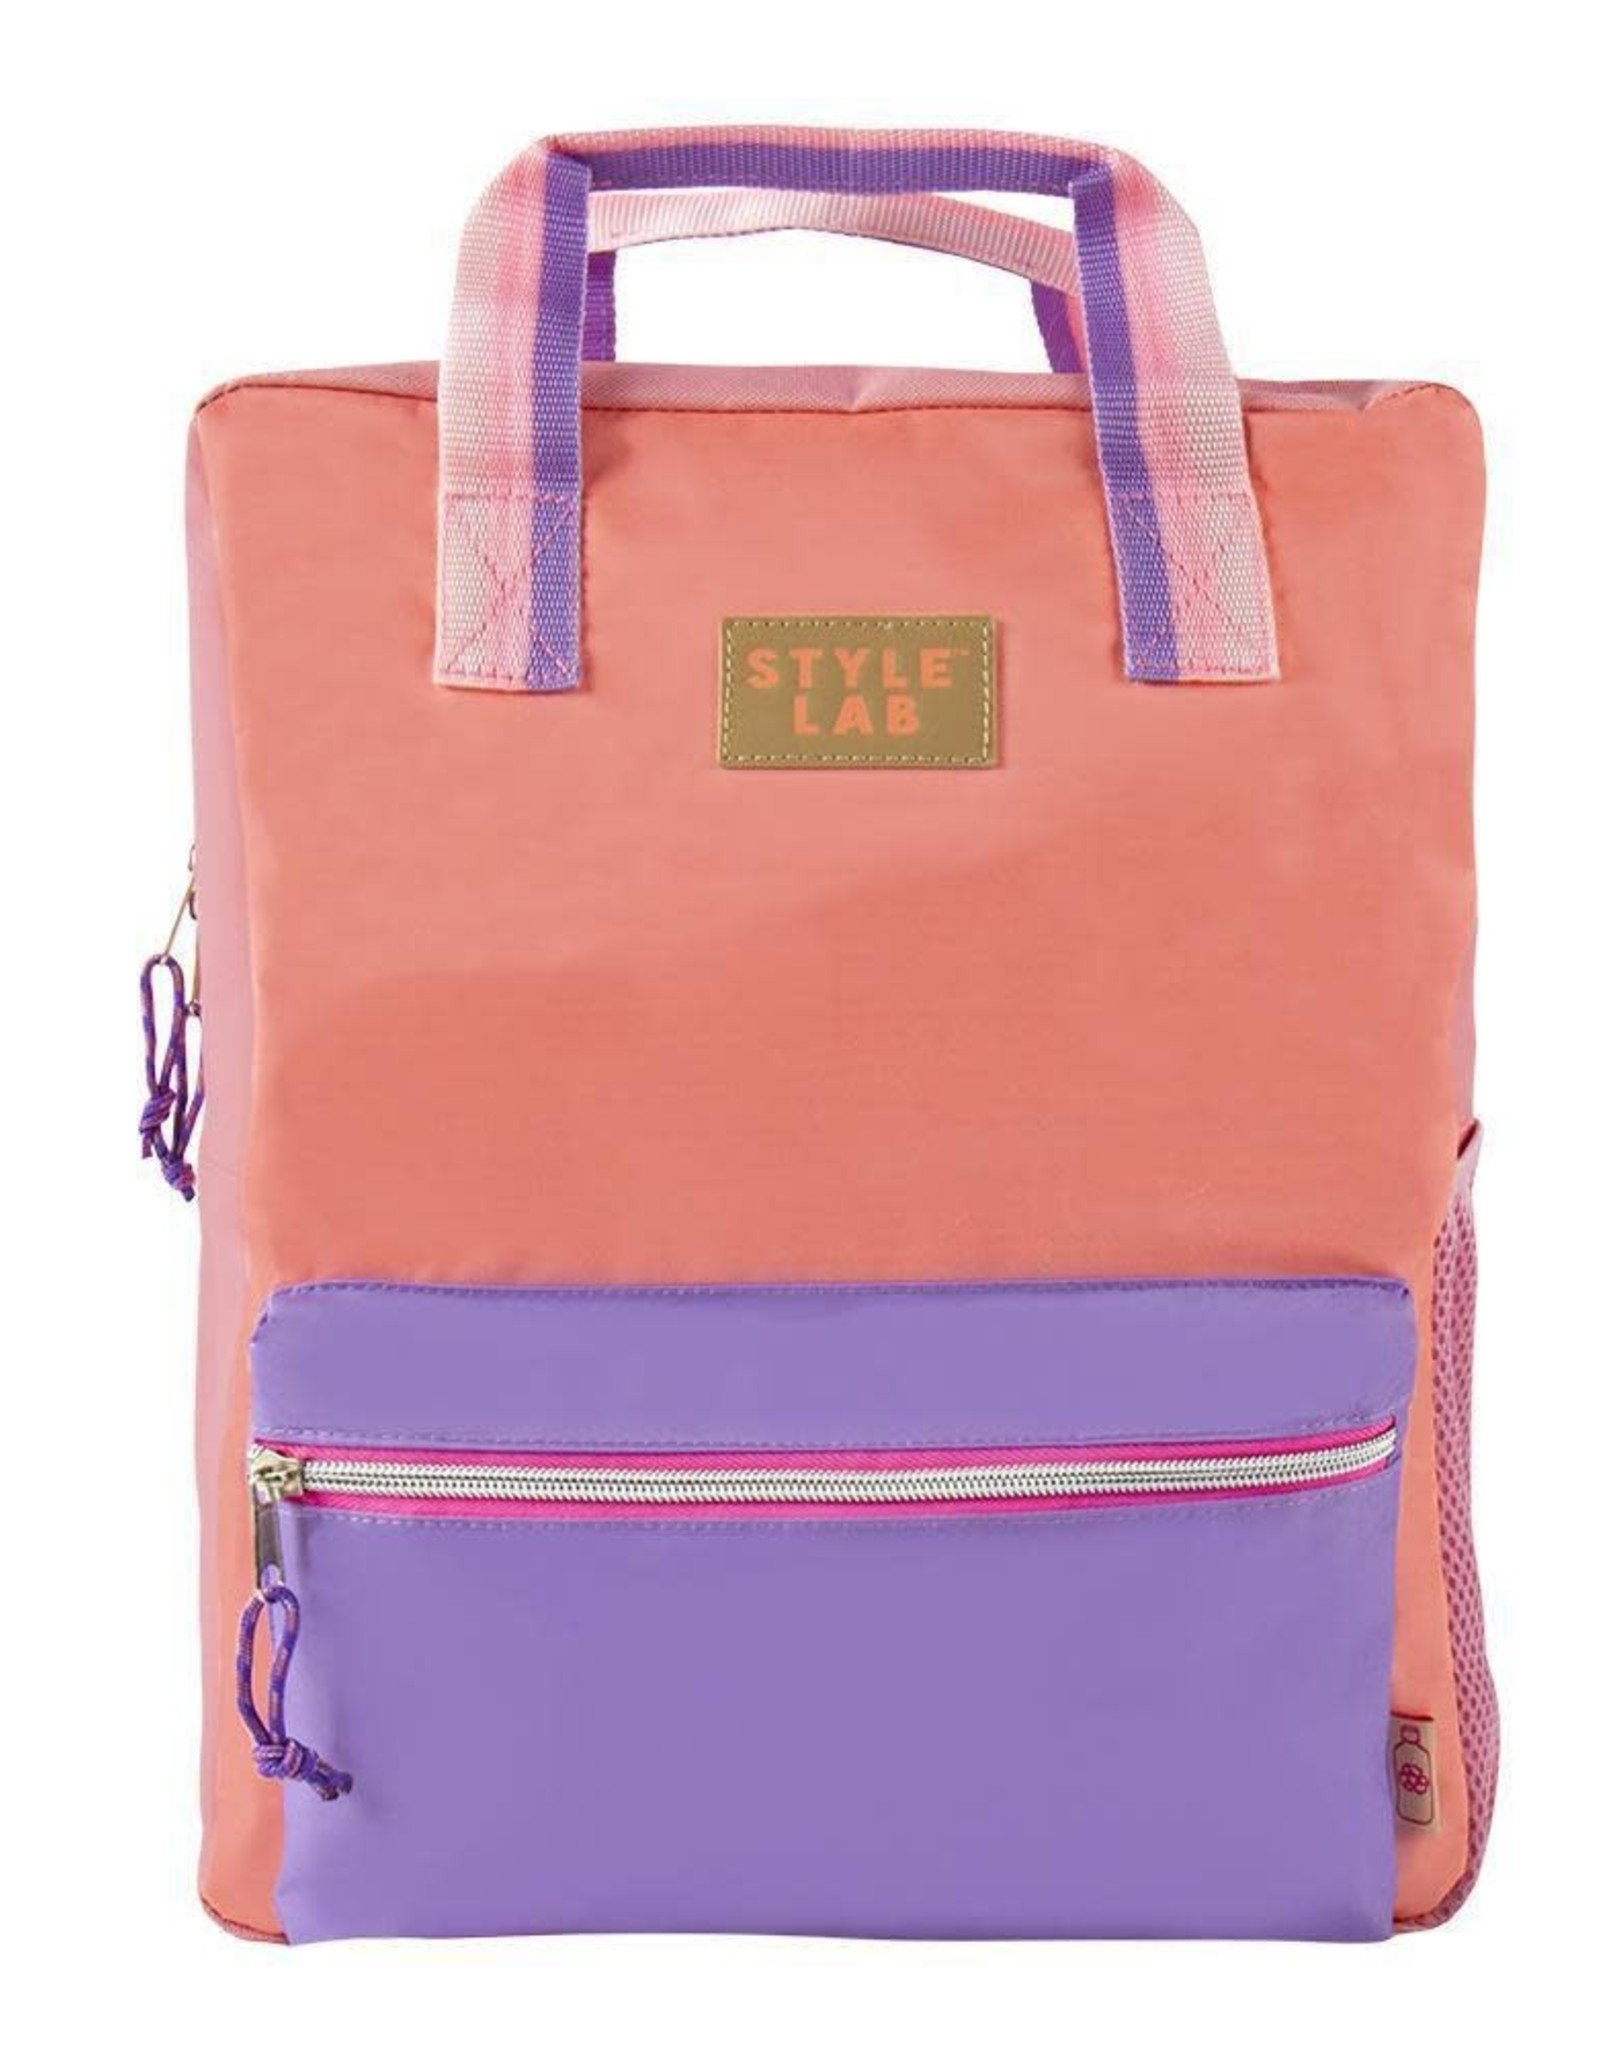 Fashion Angels BackPack ECO-Friendly Coral/Lavender